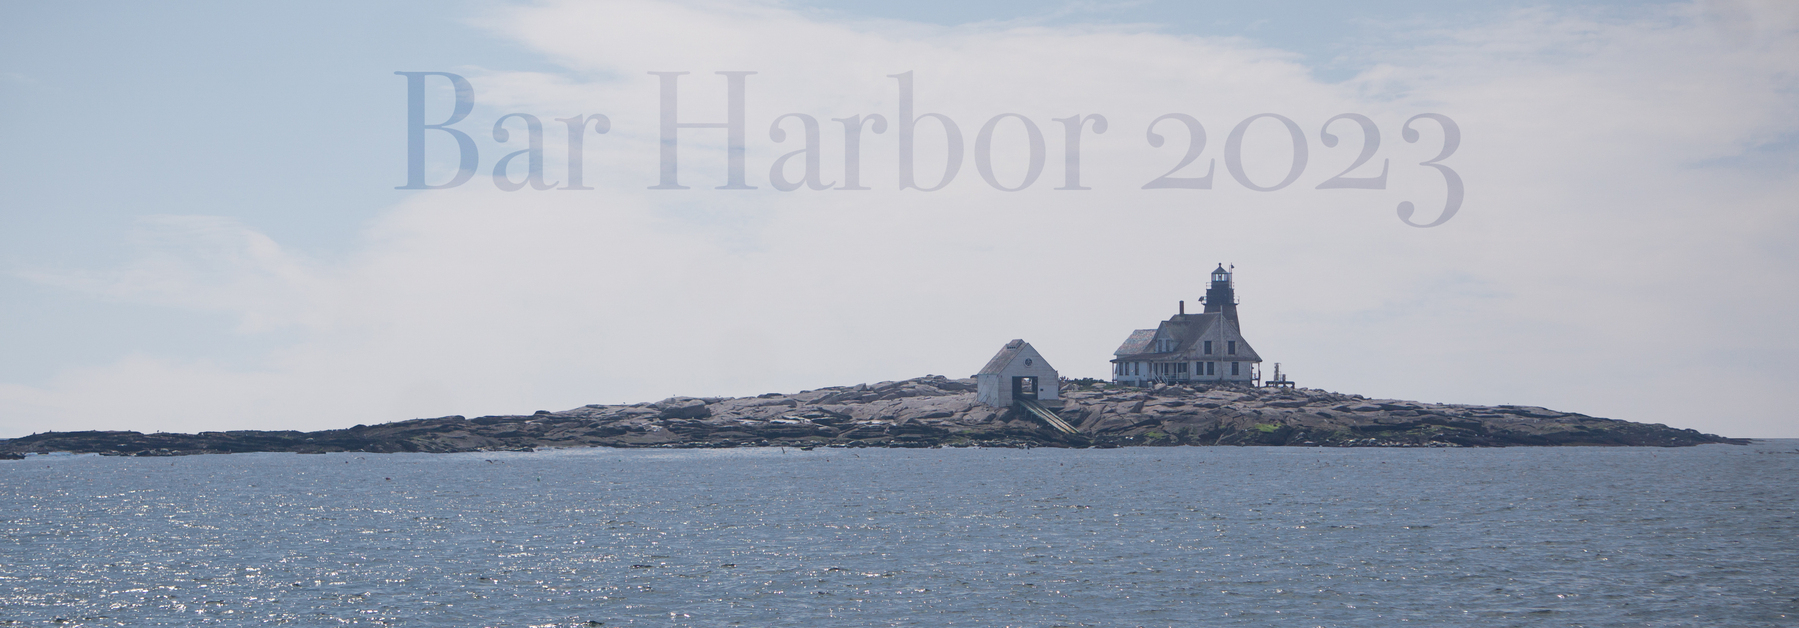 A picture of lighthouse island in Bar Harbor, Maine, from a deck on a boat. A text in the sky reads Bar Harbor 2023